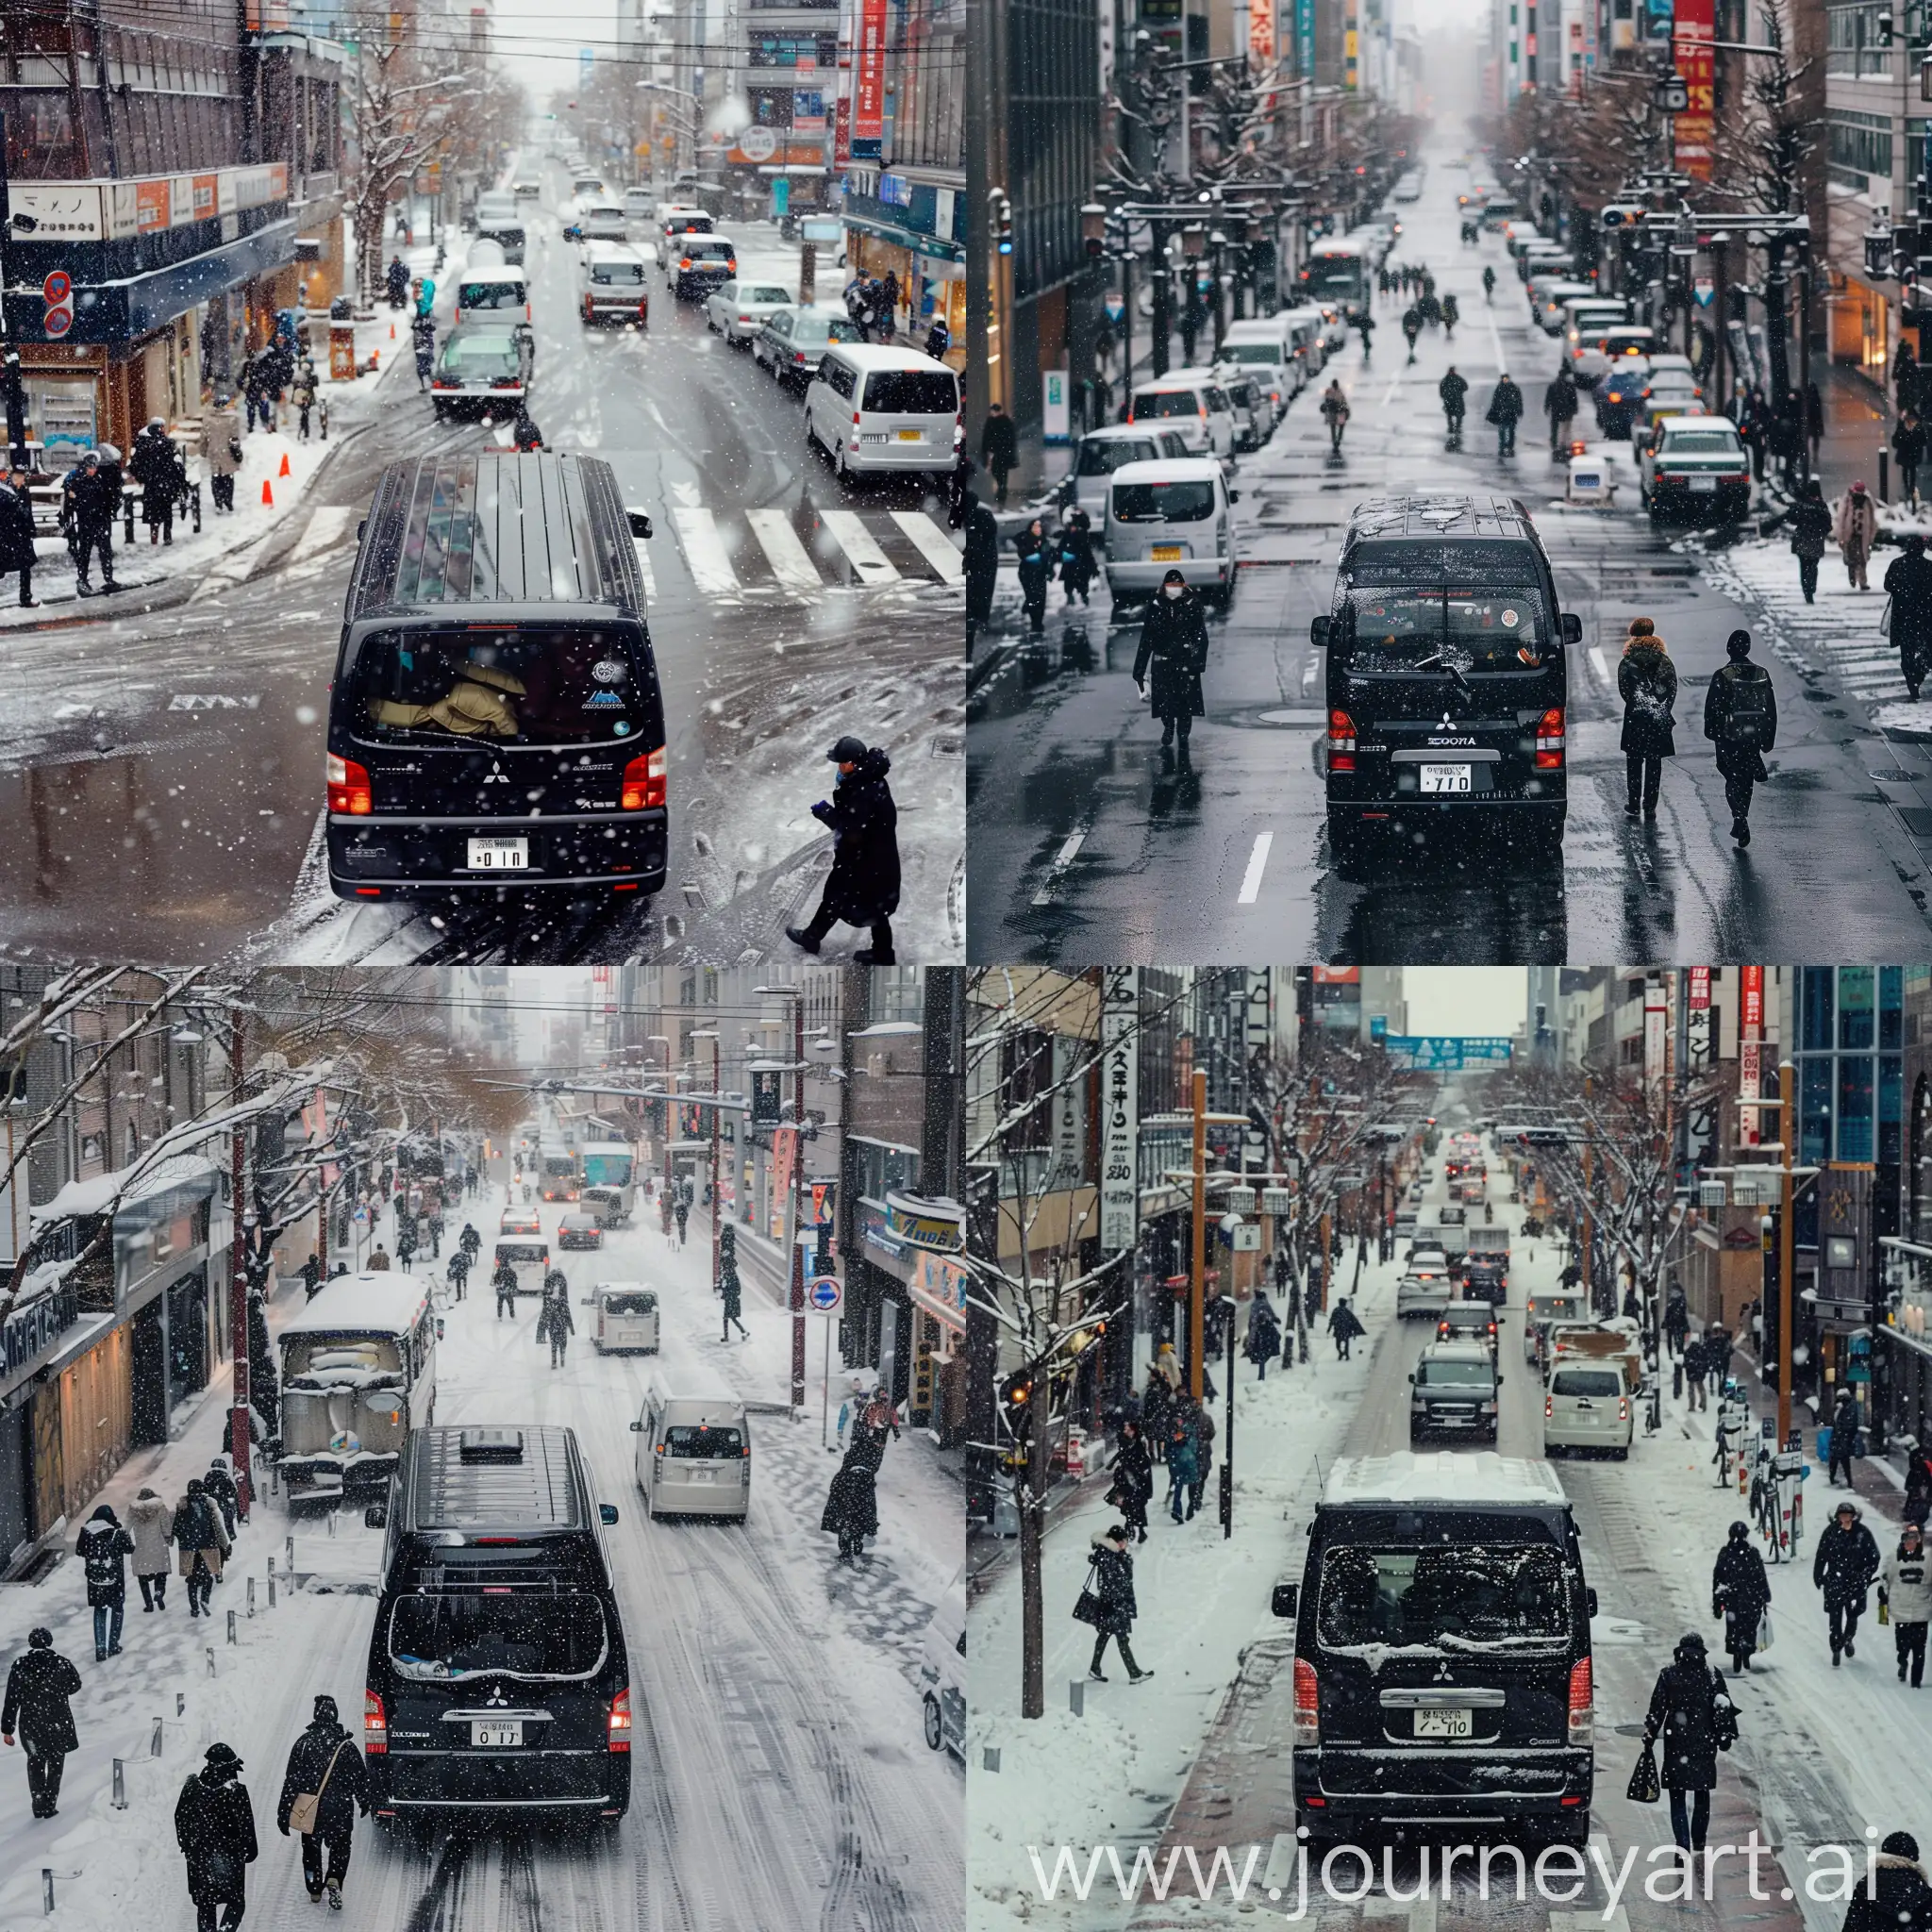 sapporo street winter, black mitsubishi delica van in the middle of the street, view from top rear of the van, snowing and wit many pedetstrian walking